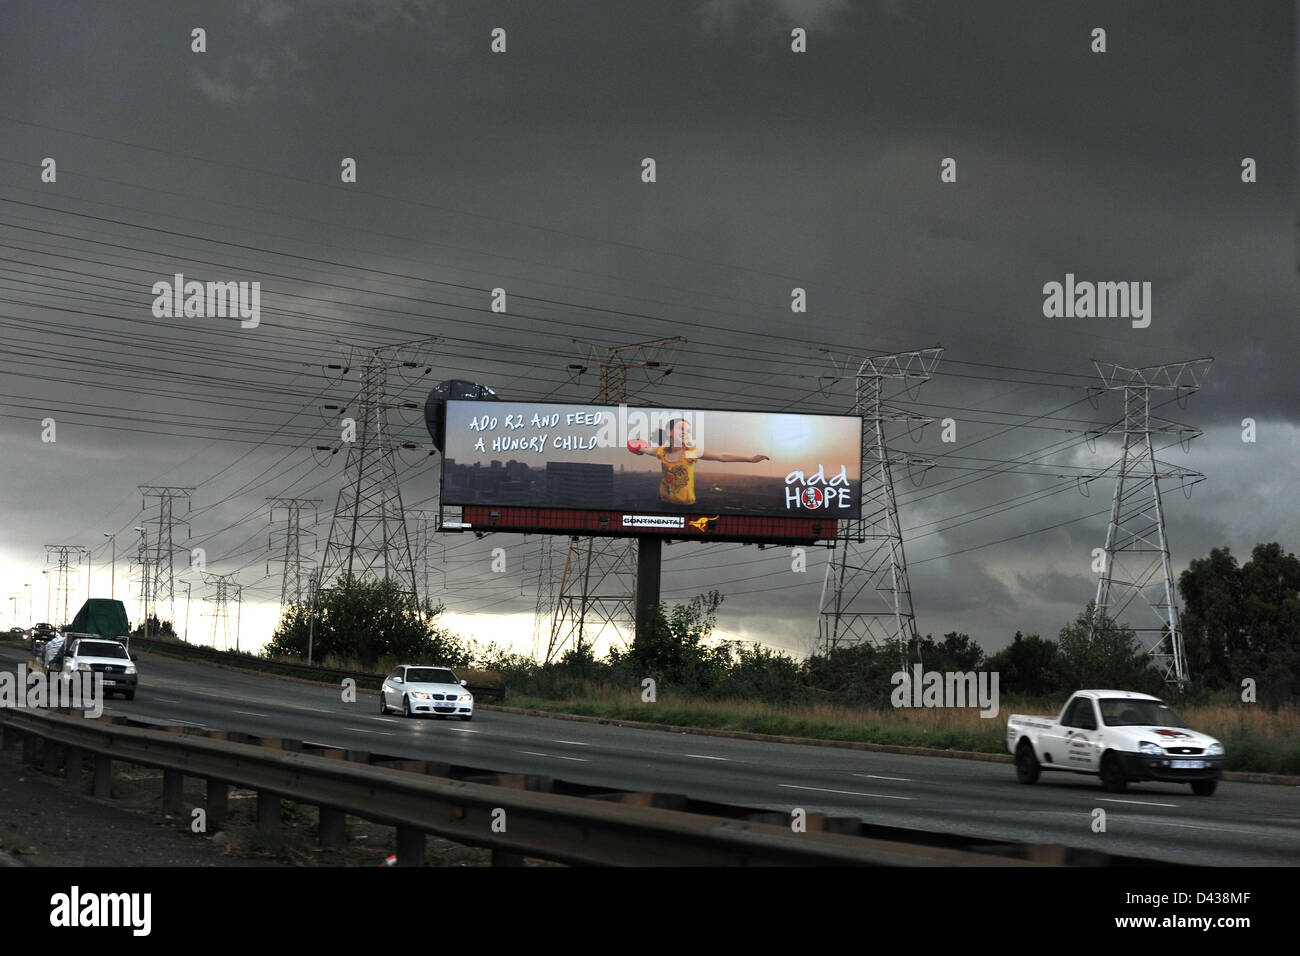 A Democratic Alliance political billboard on the side of a South African road with storm clouds in the background. Stock Photo